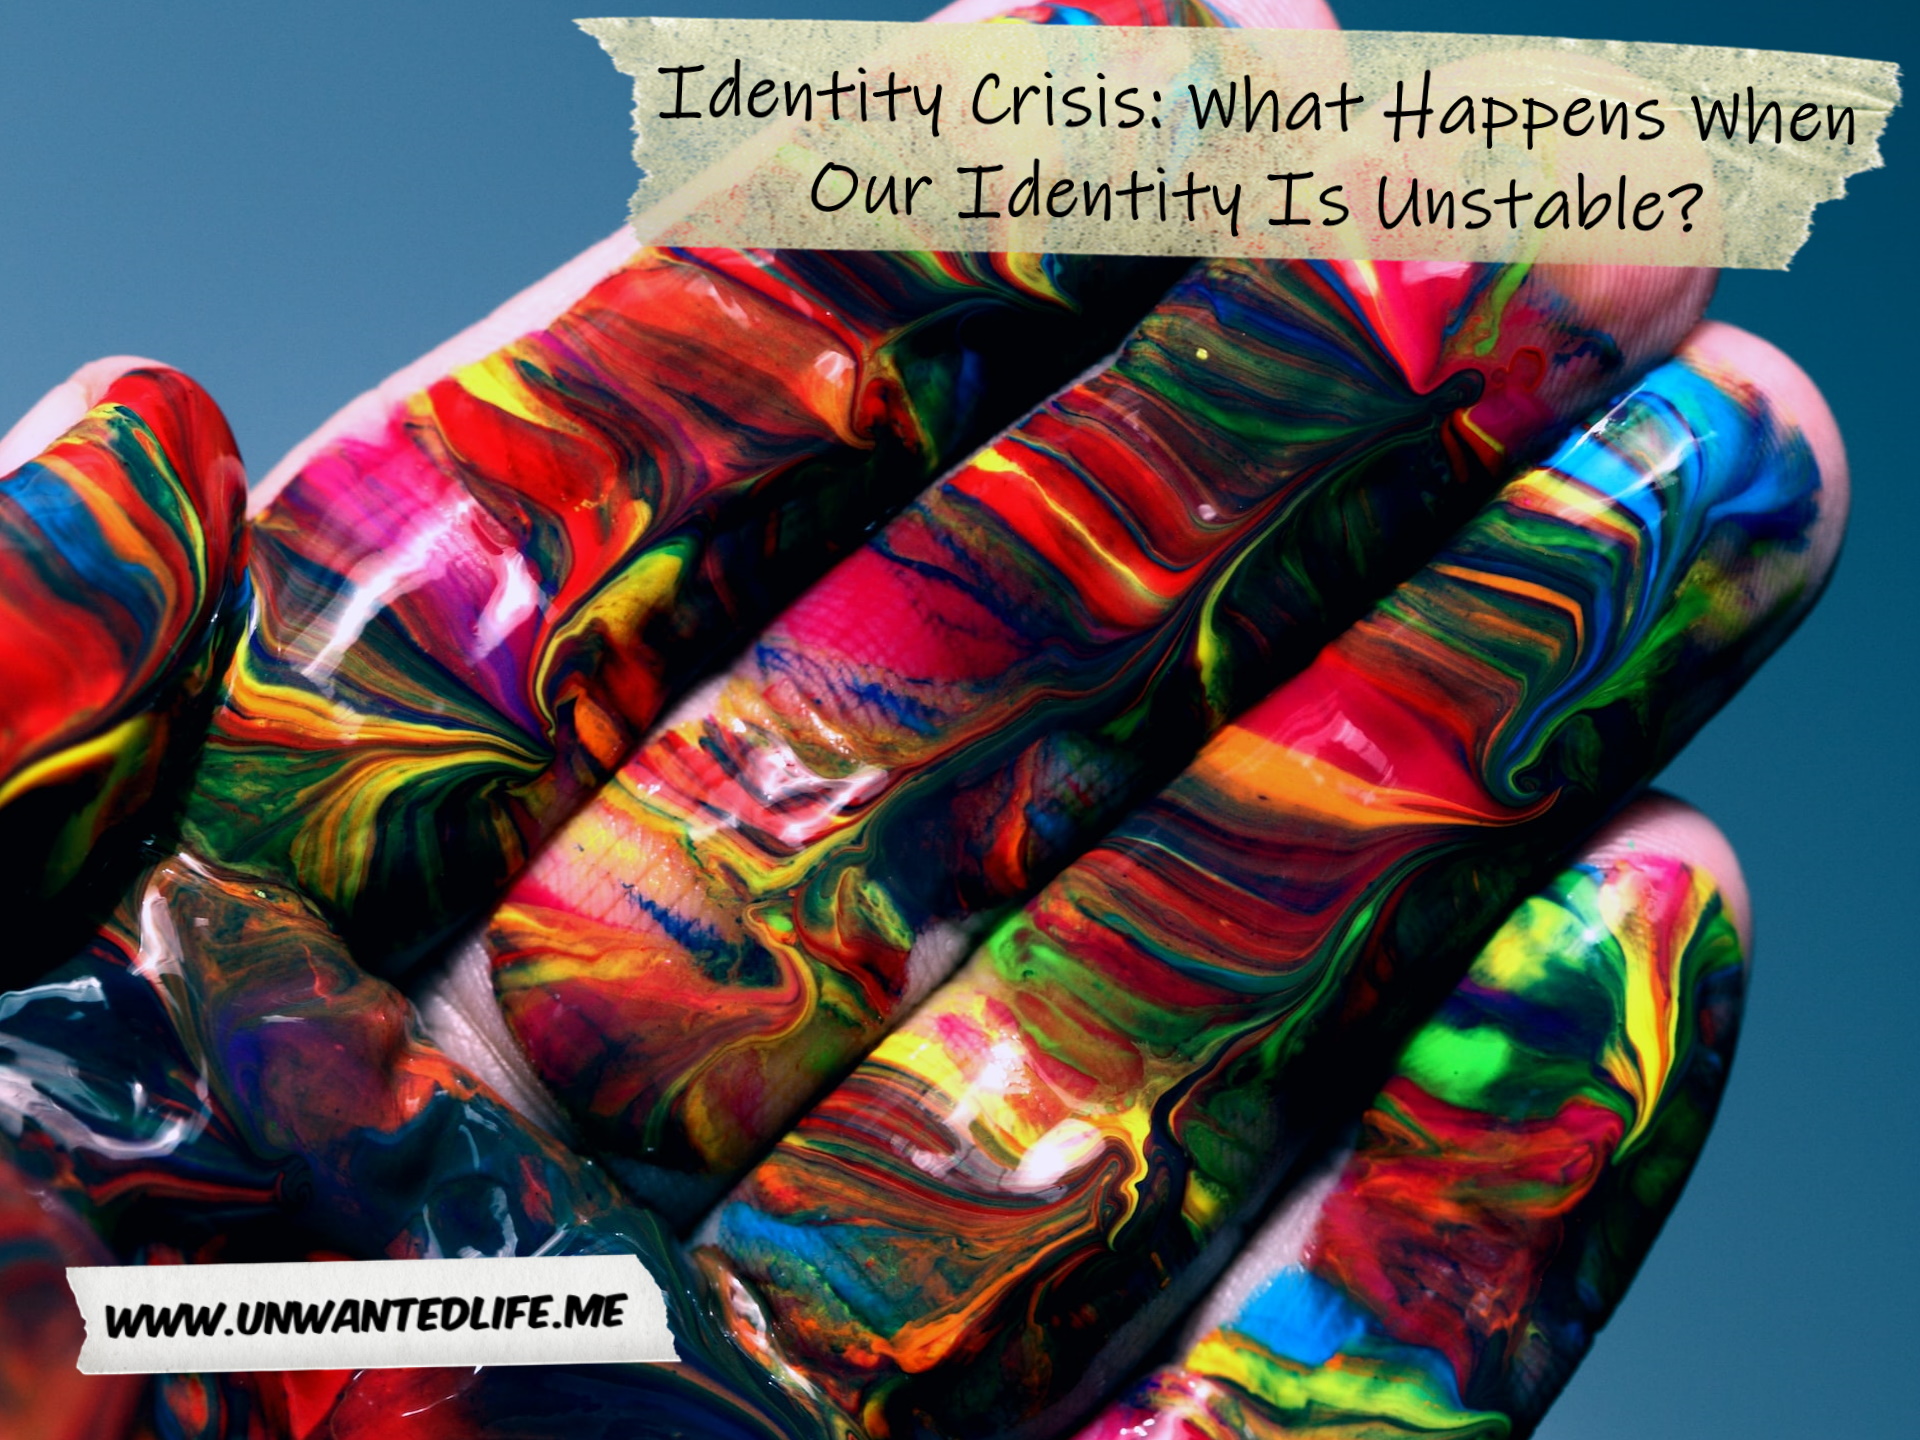 A photo of a White person's hand covered in a multitude of paint colours to represent the topic of the article - Identity Crisis: What Happens When Our Identity Is Unstable?